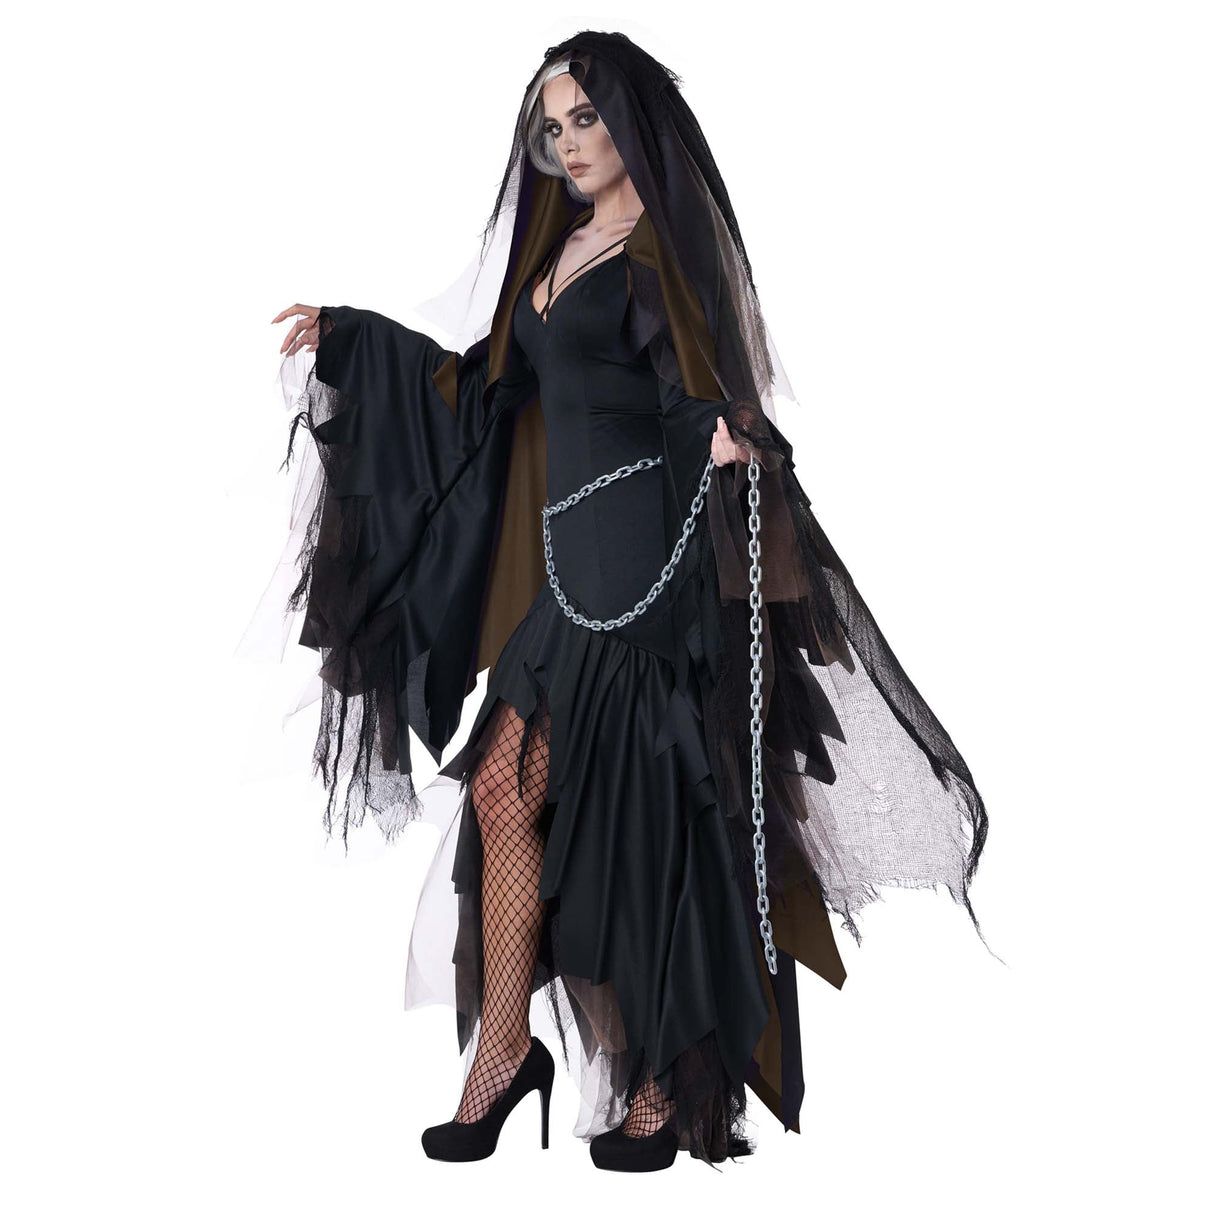 CALIFORNIA COSTUMES Costumes Drop Dead Gorgeous Reaper Costume for Adults